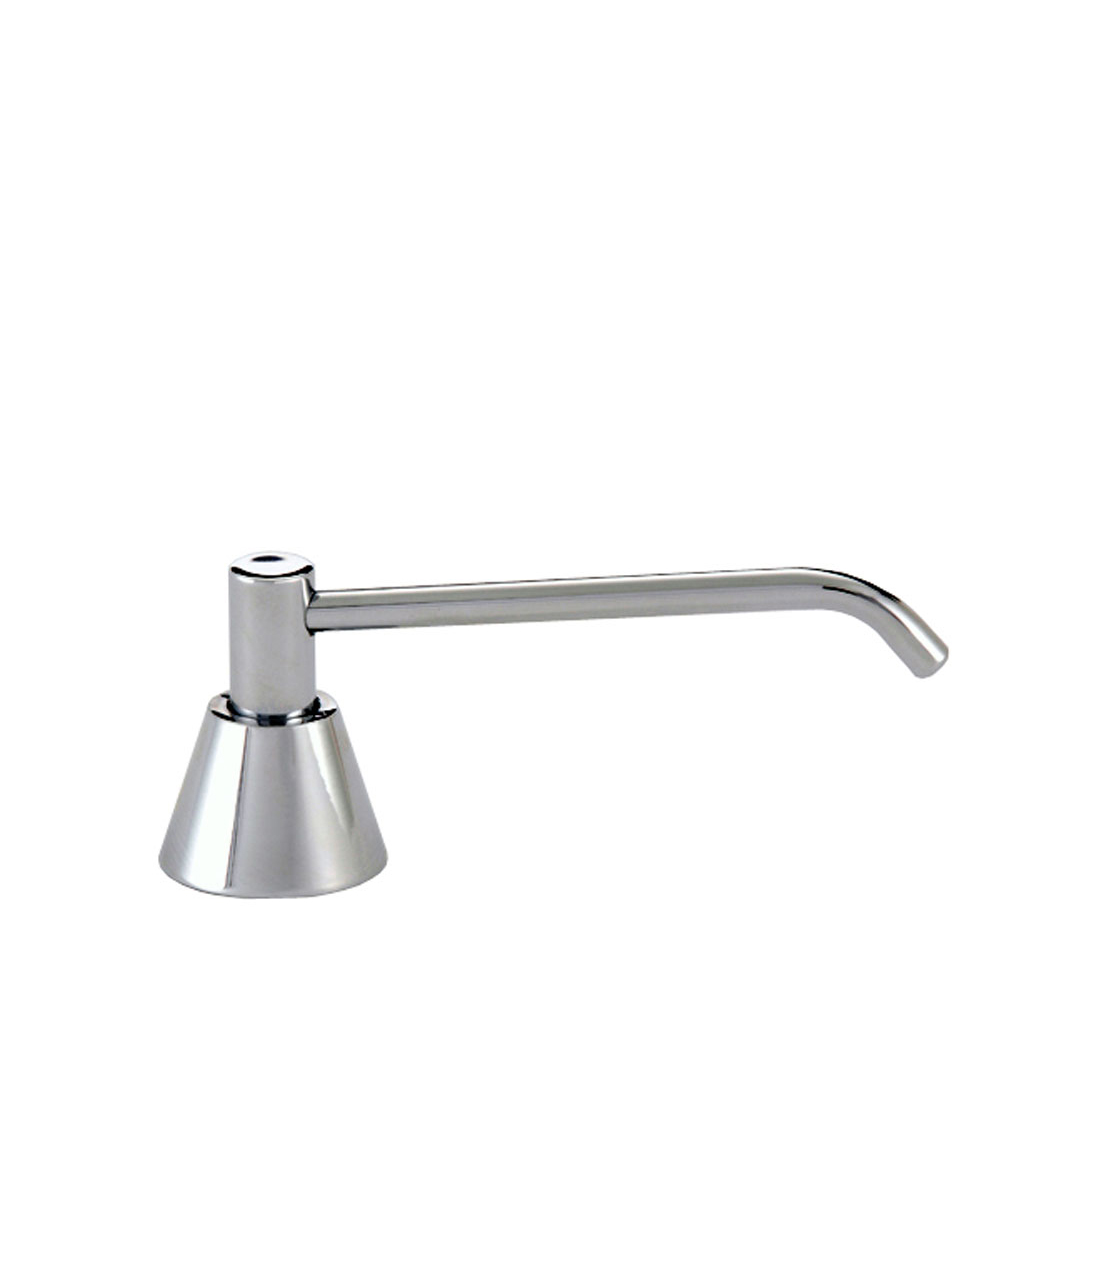 Basin-Mounted Soap Dispenser with All-Purpose Valve - (Model #: g-64lb-6) Image